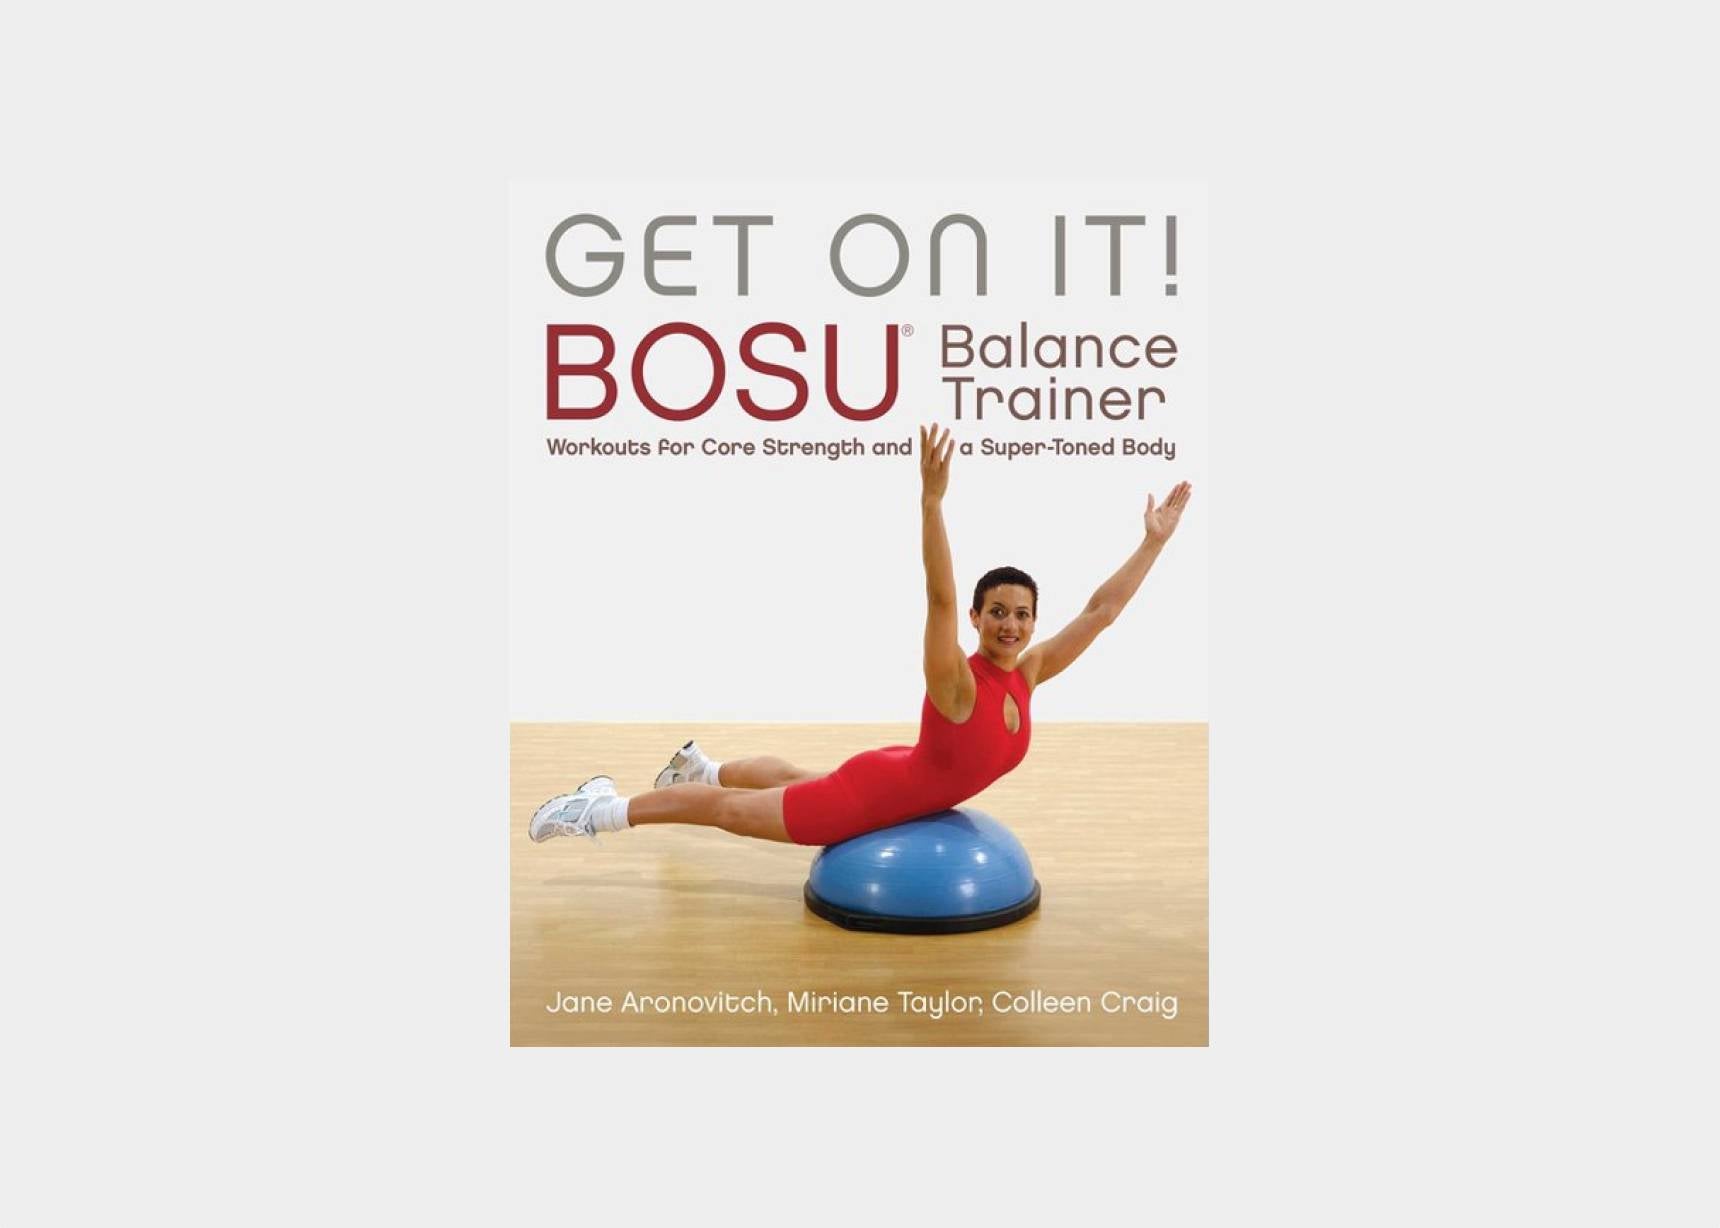 Get on It! BOSU Balance Trainer. Workouts for Core Strength and a Super-Toned Body